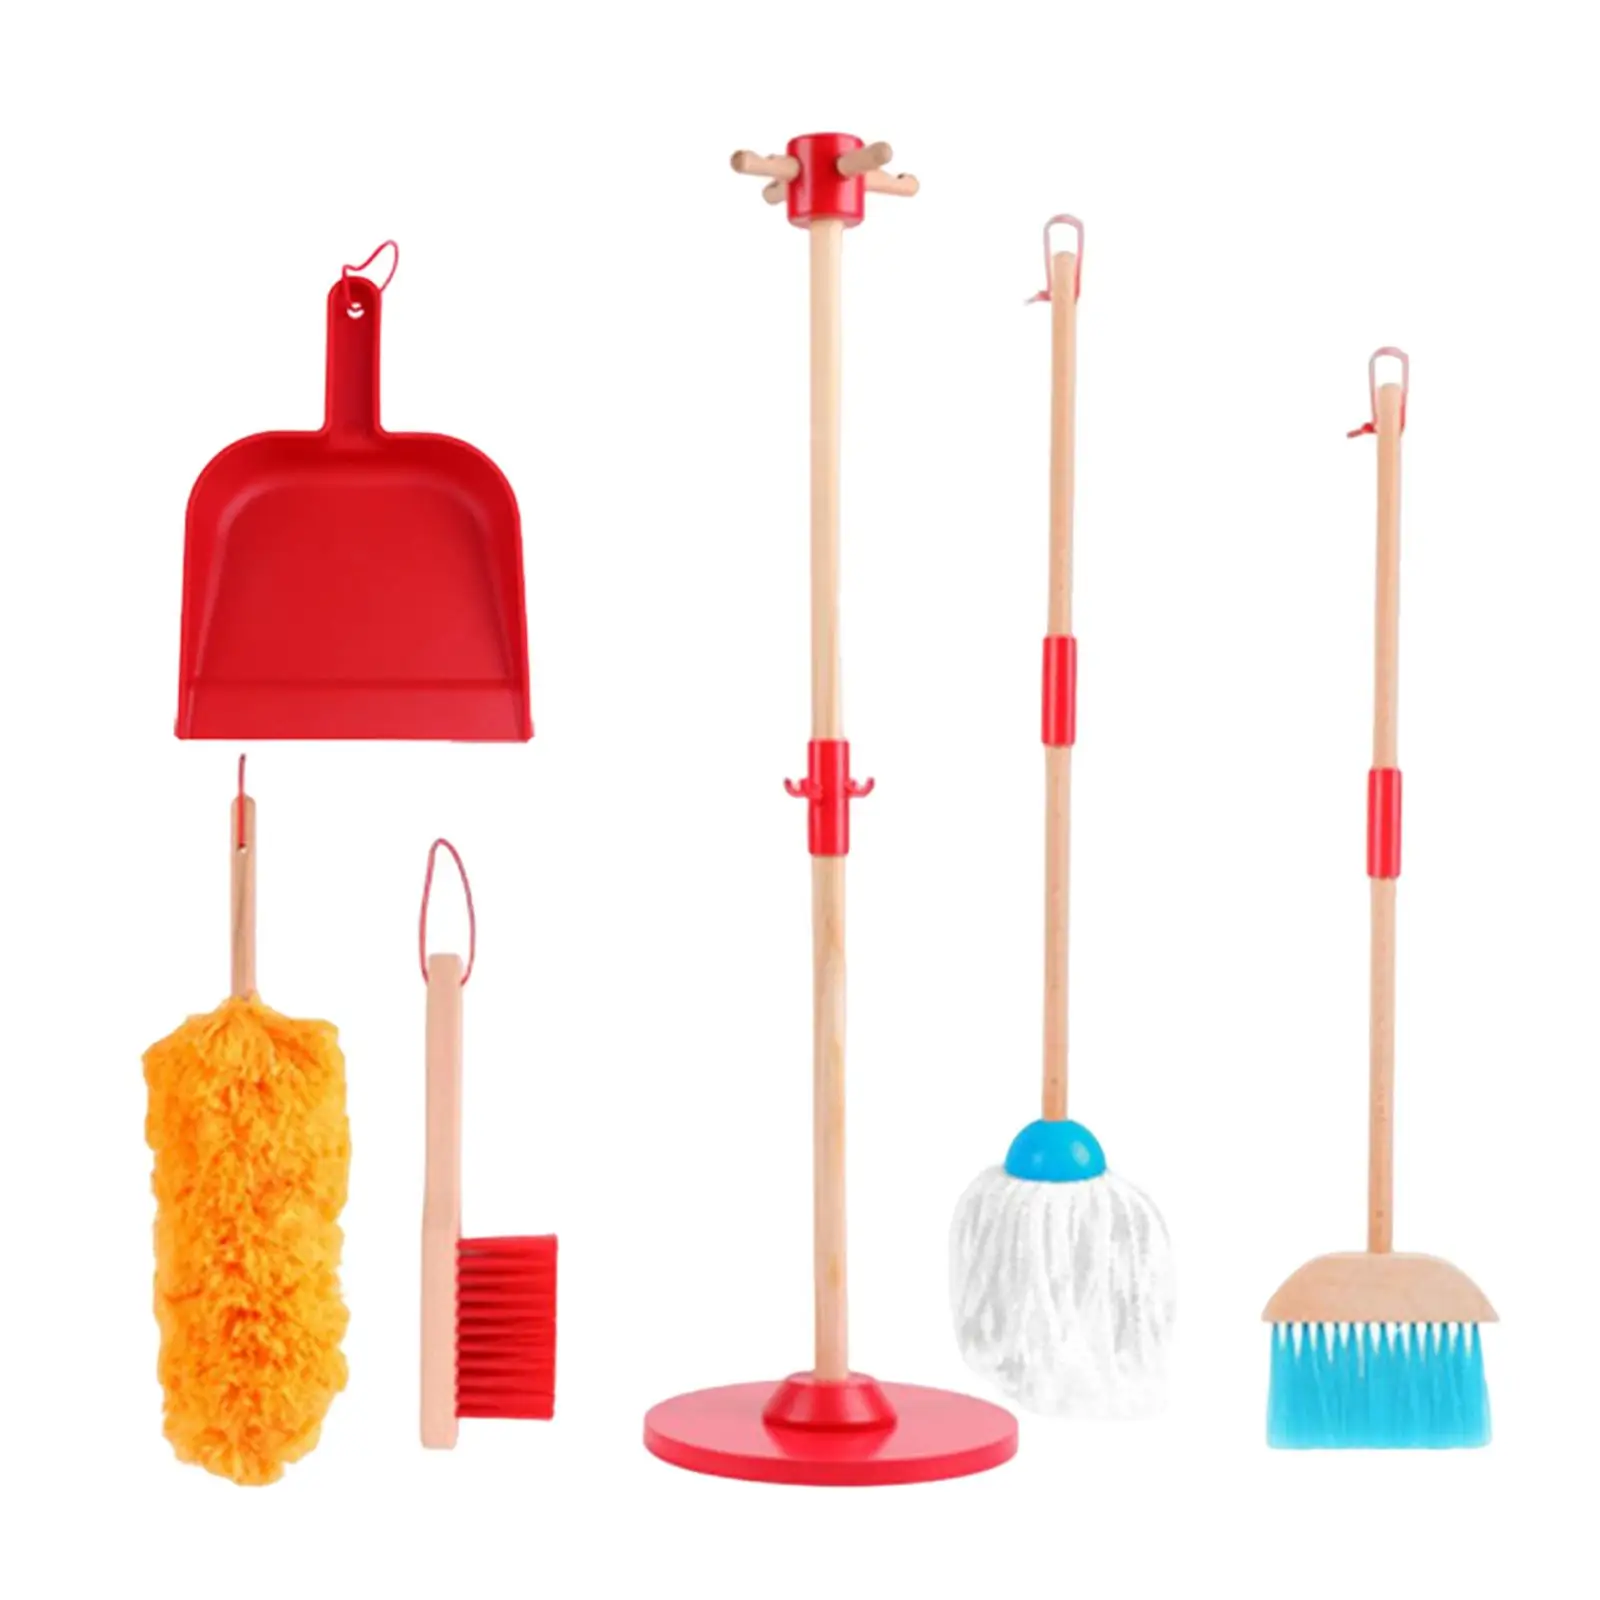 6  Household Cleaning Set for Kids Broom Brush Mop Dustpan Vacuum Cleaner Toys for Girls Boys Ages -6 Years Old Around